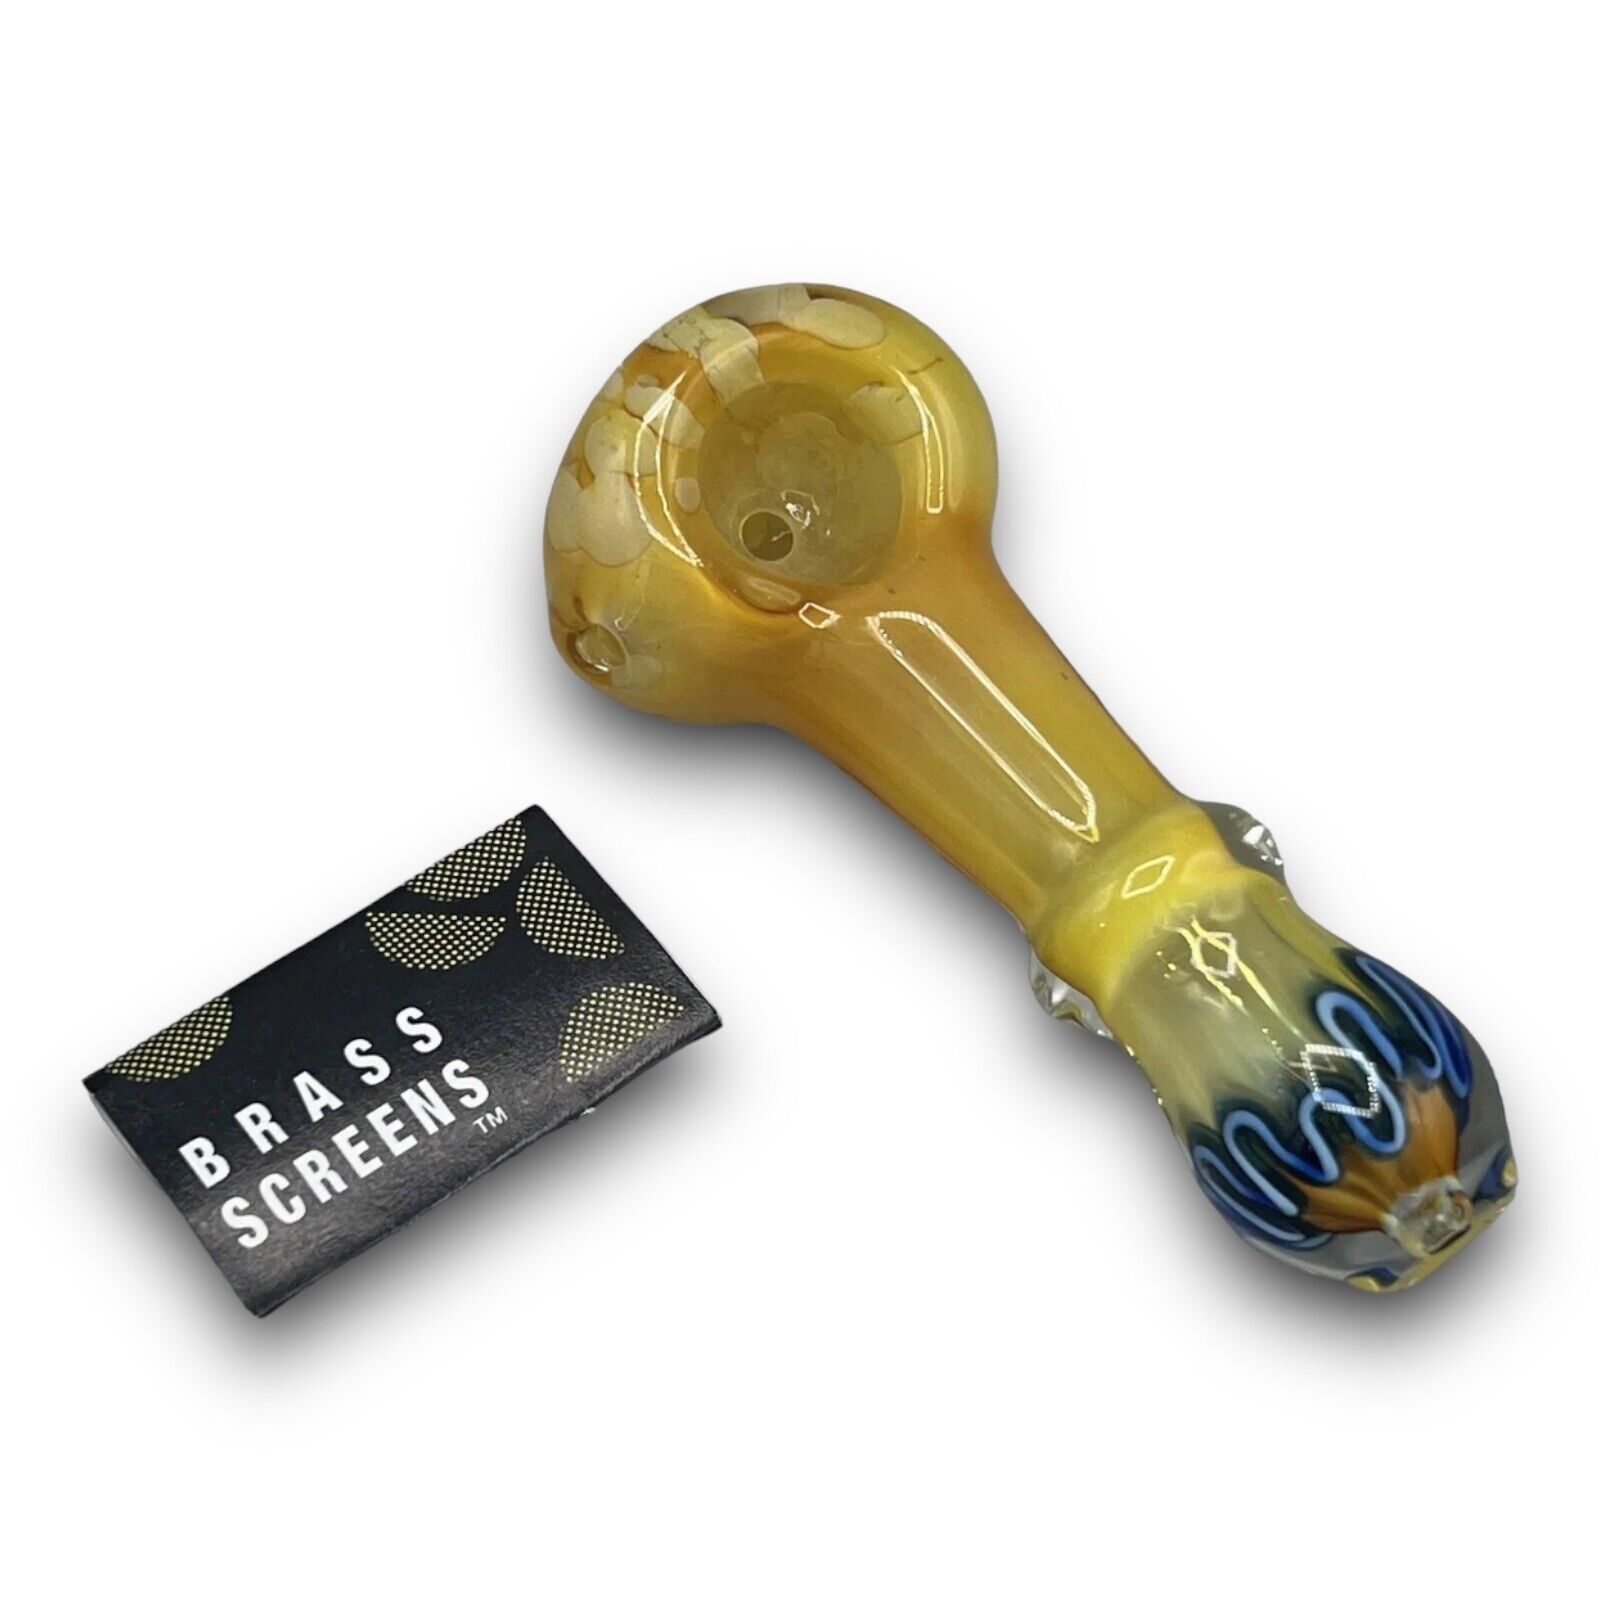 3.5 Pipe Glass Tobacco Smoking Collectible Bowl Gold Fumed Pipe W/ Screens. Available Now for 13.75